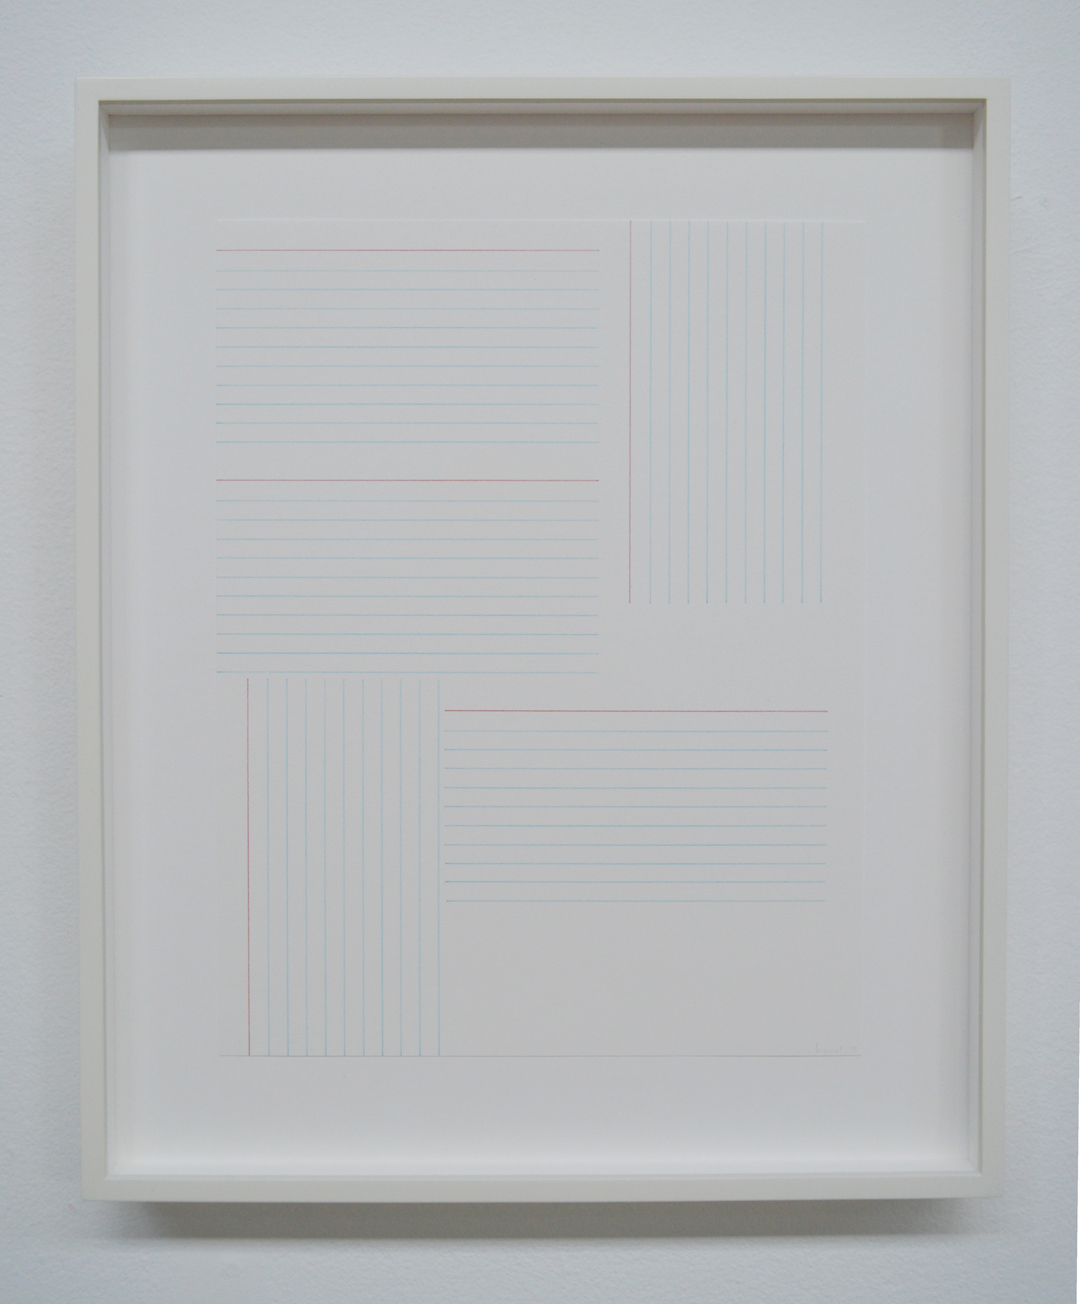 Ken Nicol the most index cards trying to hide on letter sized paper 2019